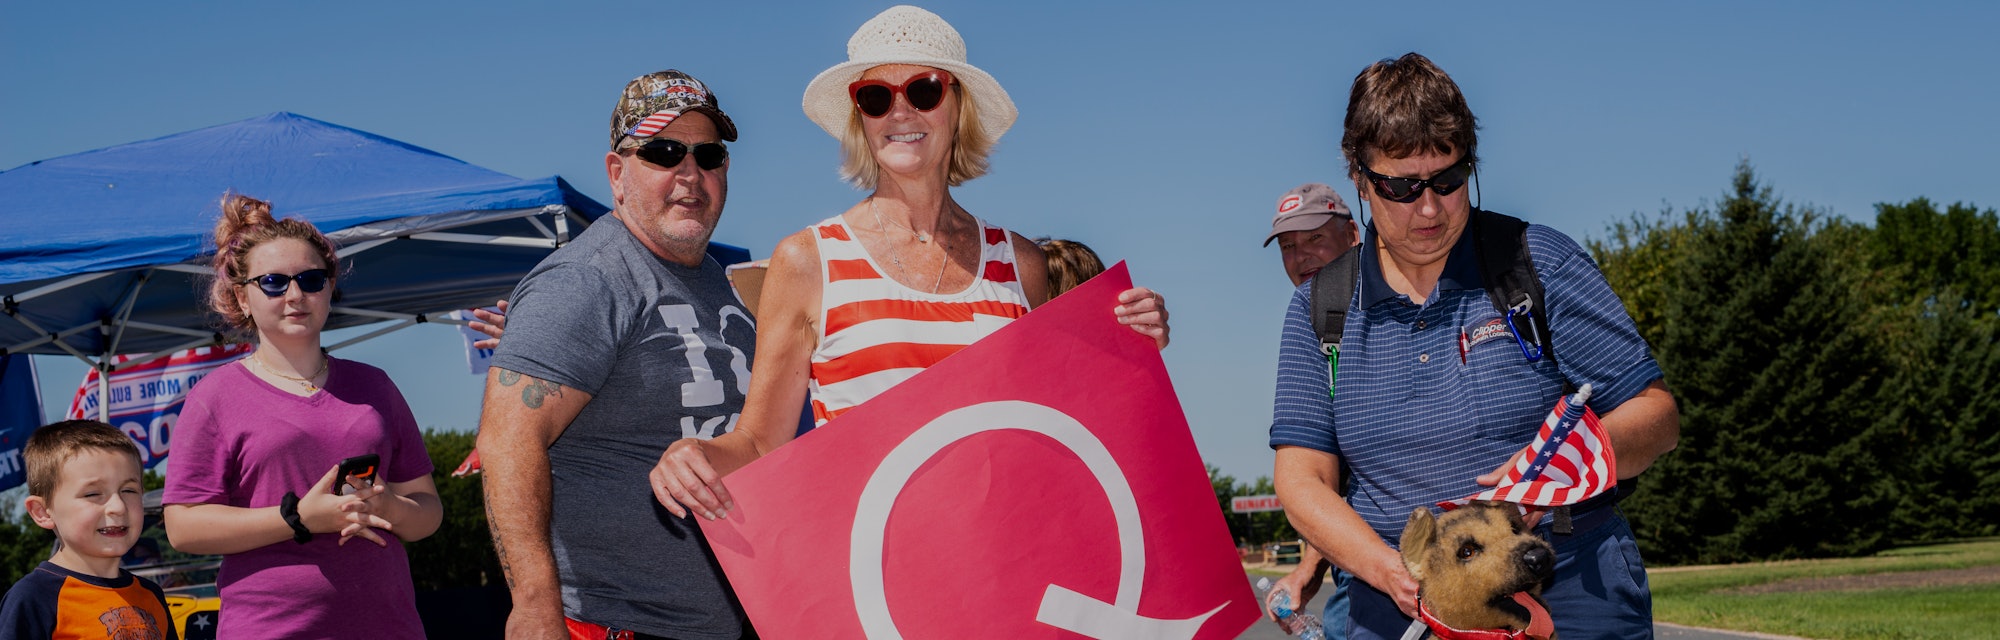 A QAnon supporter can be seen holding a Q for the movement.